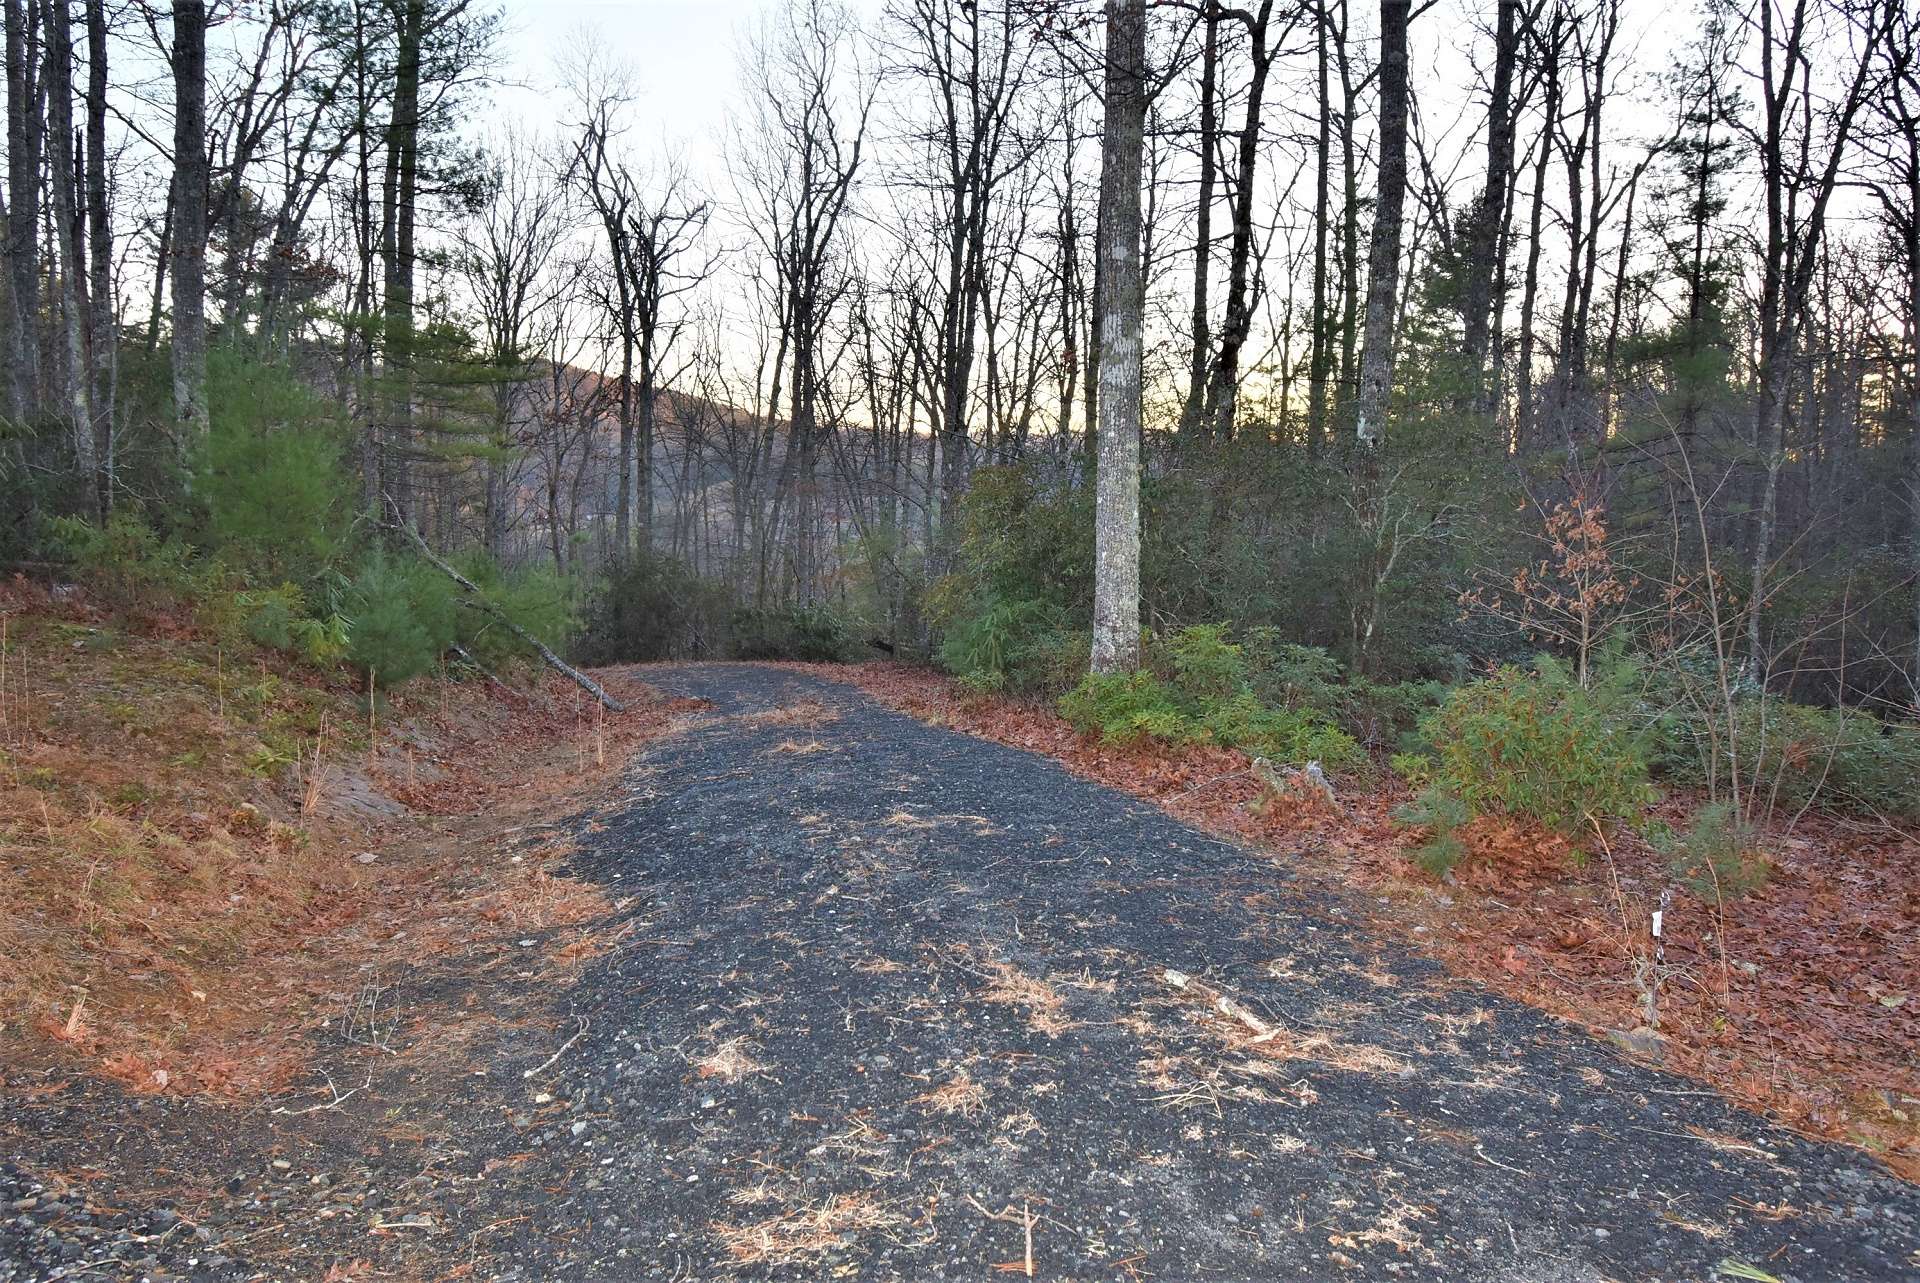 This lot has a 3-bedroom septic permit and offers seasonal mountain and river views. Lot 36 is offered at $45,000. Ask for additional information on listing H292.